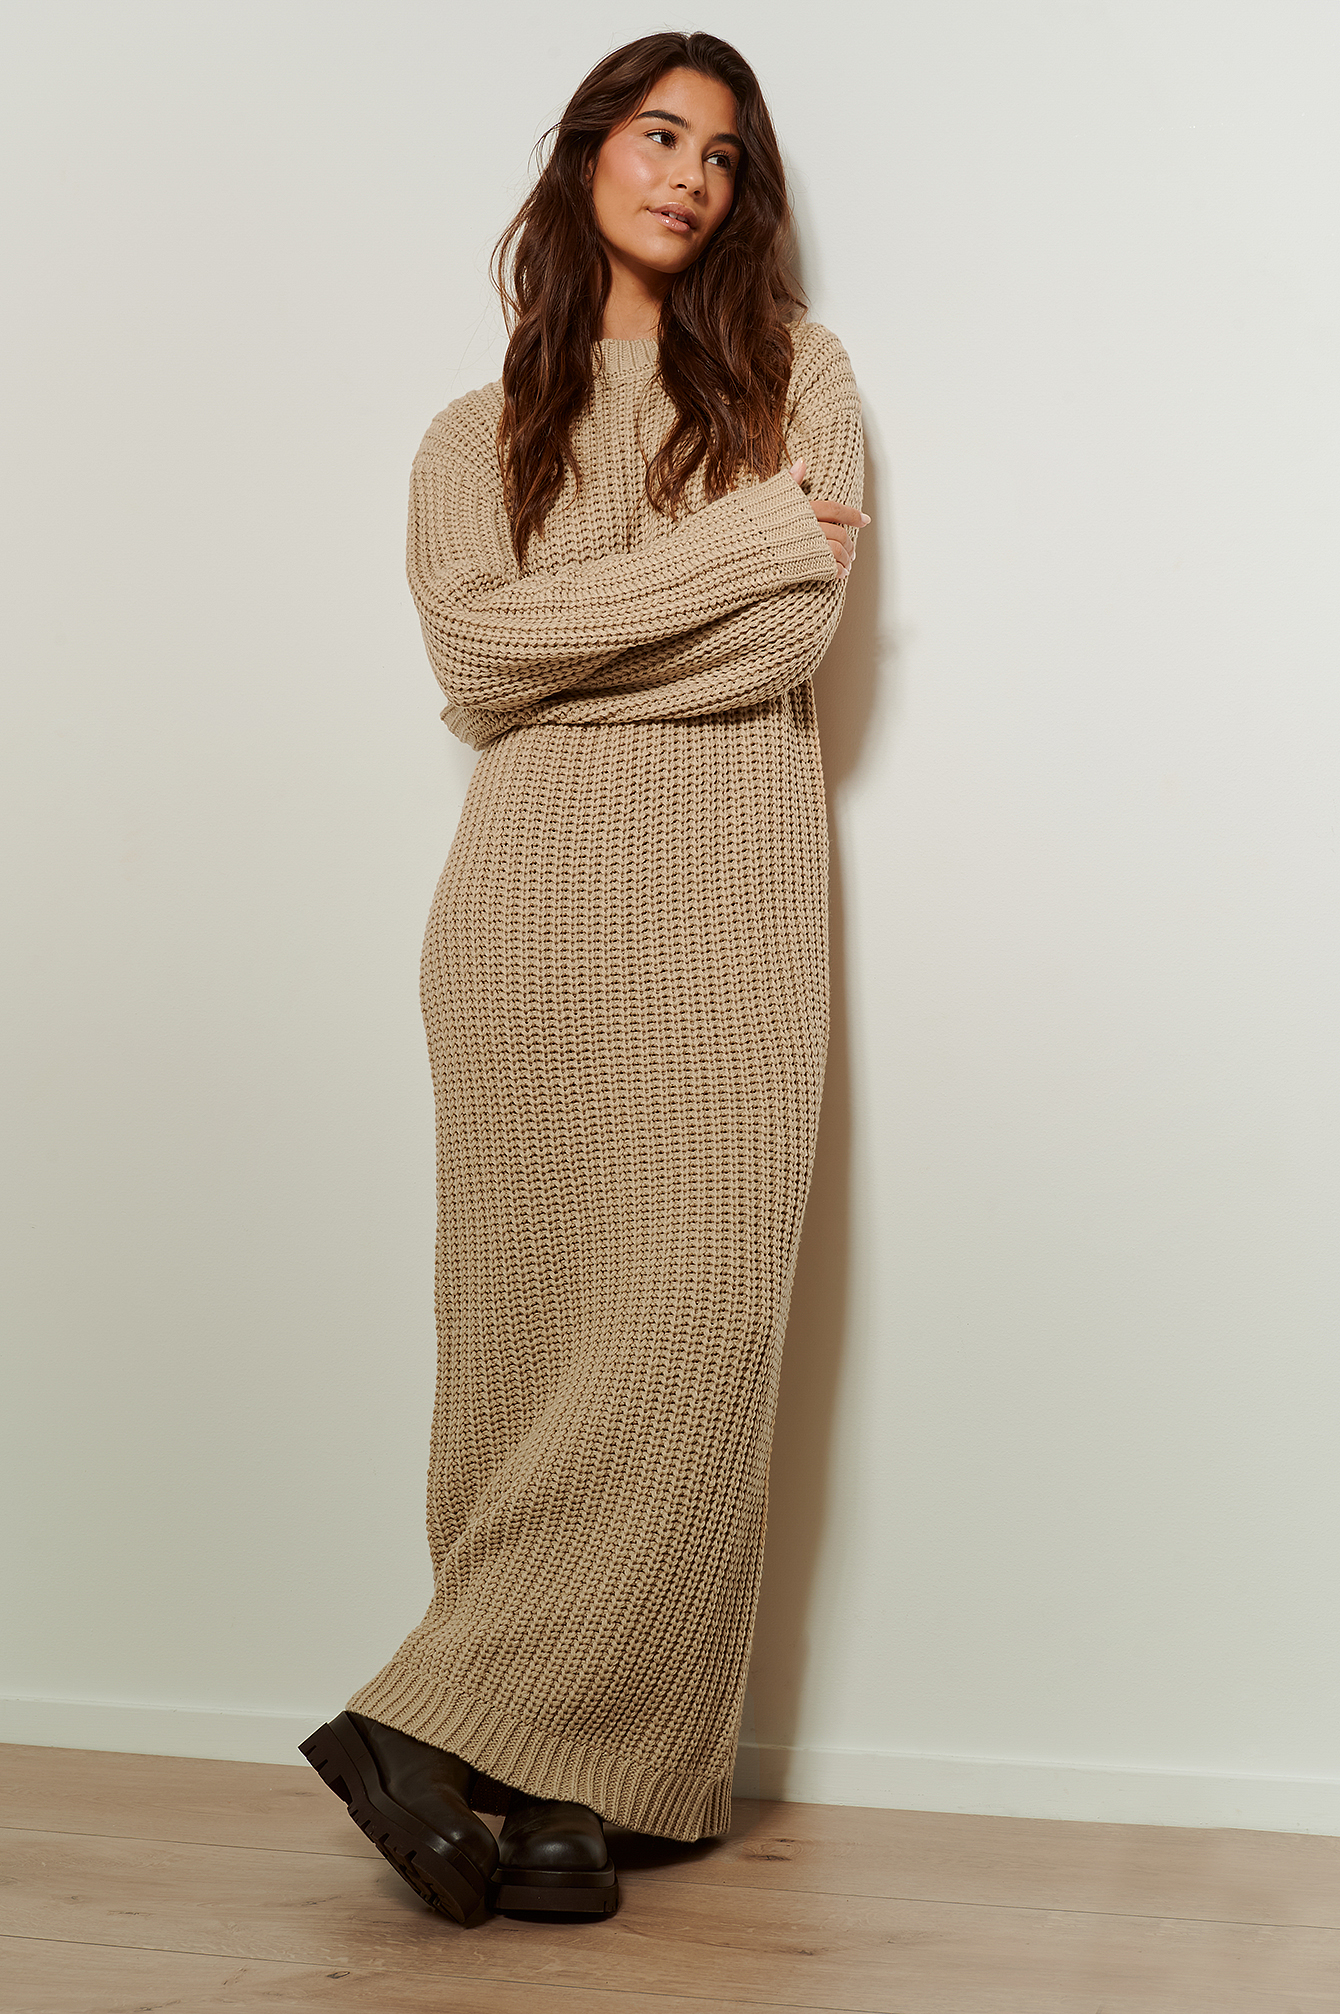 Heavy Knit Maxi Dress Outfit